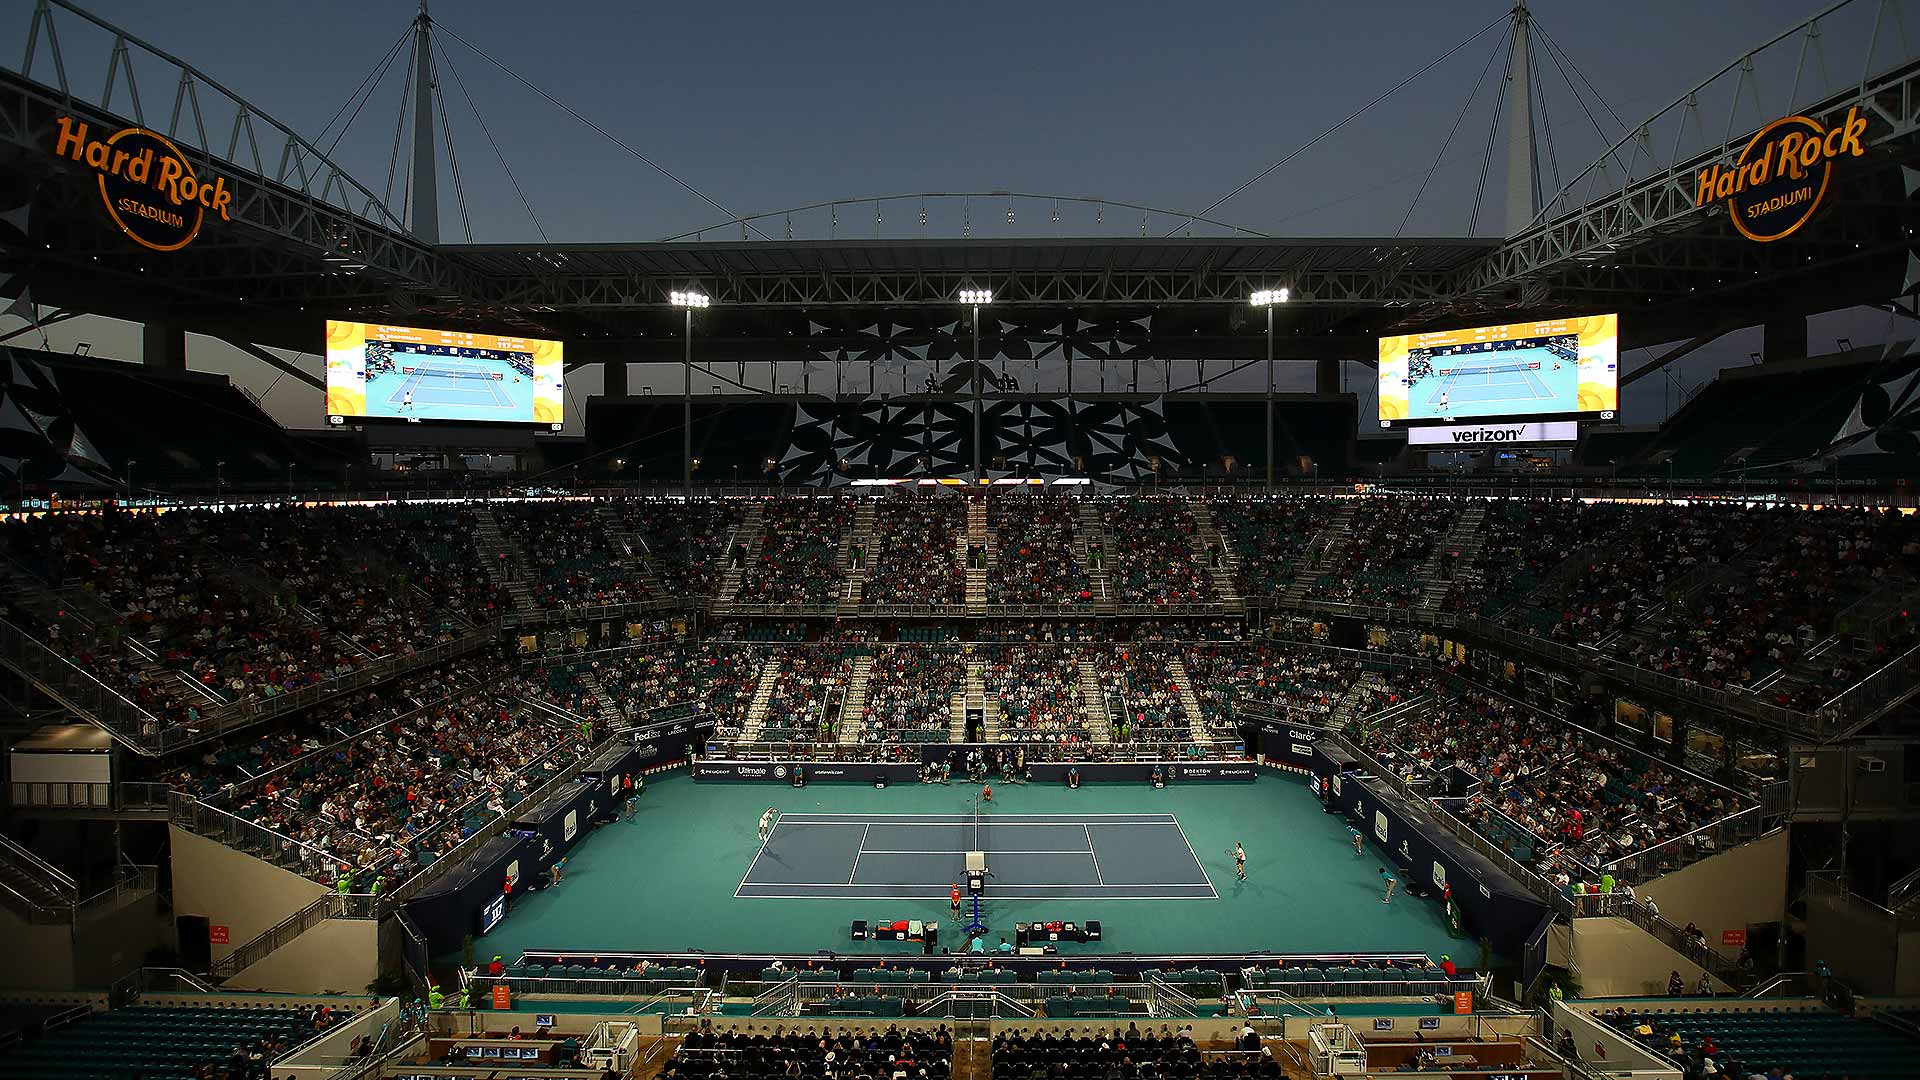 Miami Open presented by Itau, an ATP Masters 1000 tennis tournament in Florida